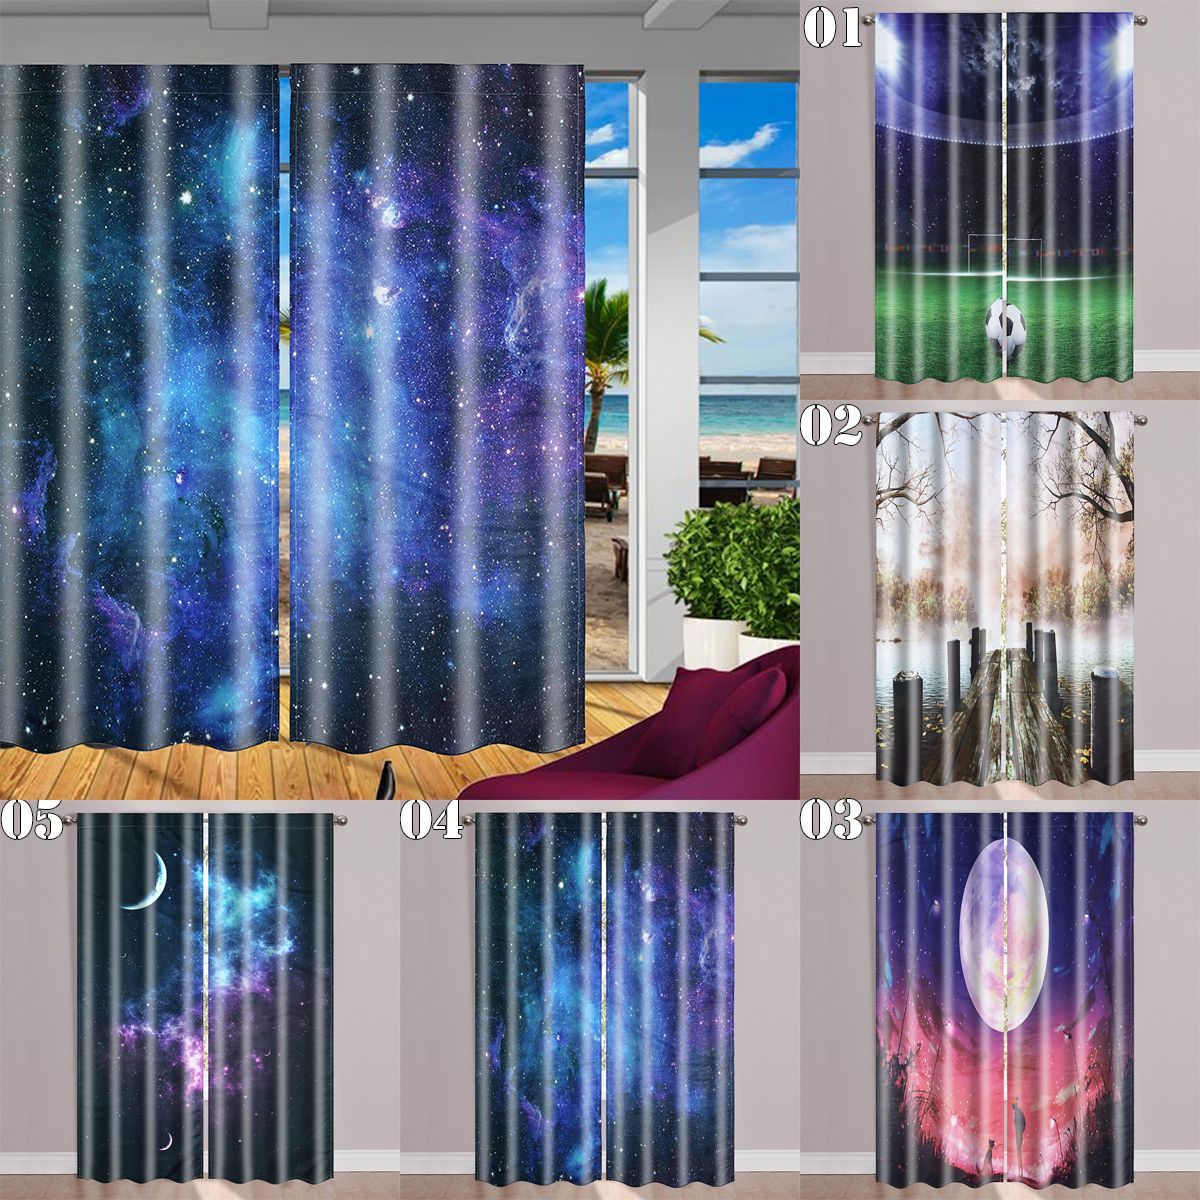 2-Panel-Blackout-Blinds-Thermal-Insulated-3D-Printed-Galaxy-Window-Curtains-Screens-1542466